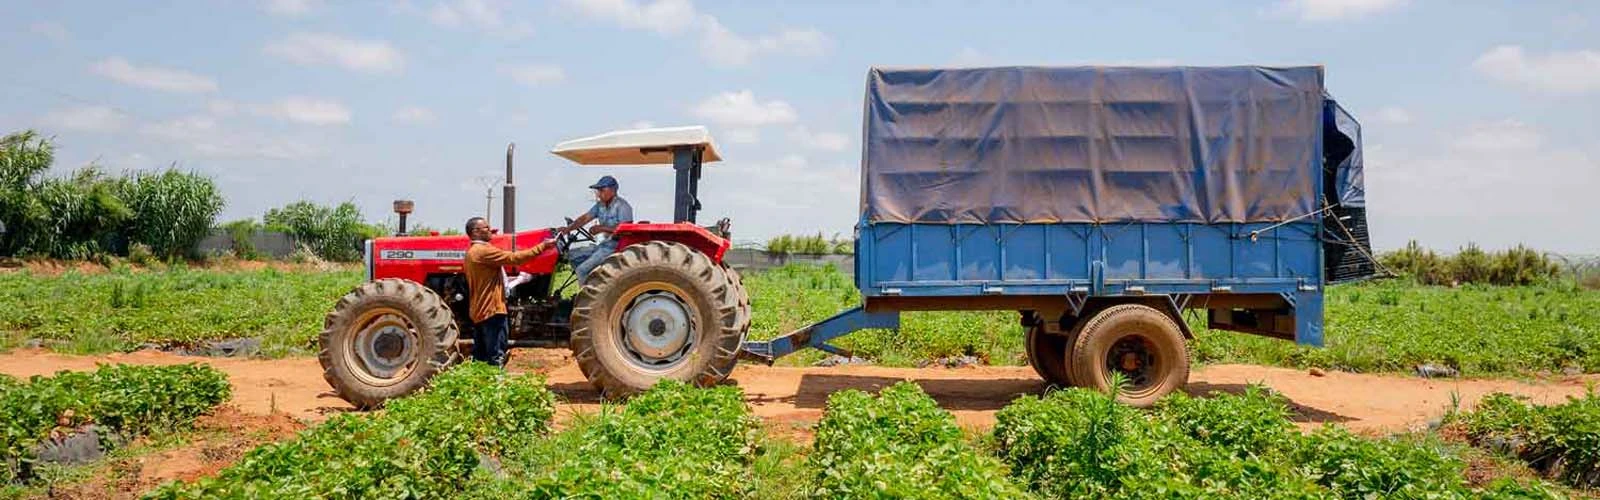 The Environmental Impact of Tractor Farming in Ghana